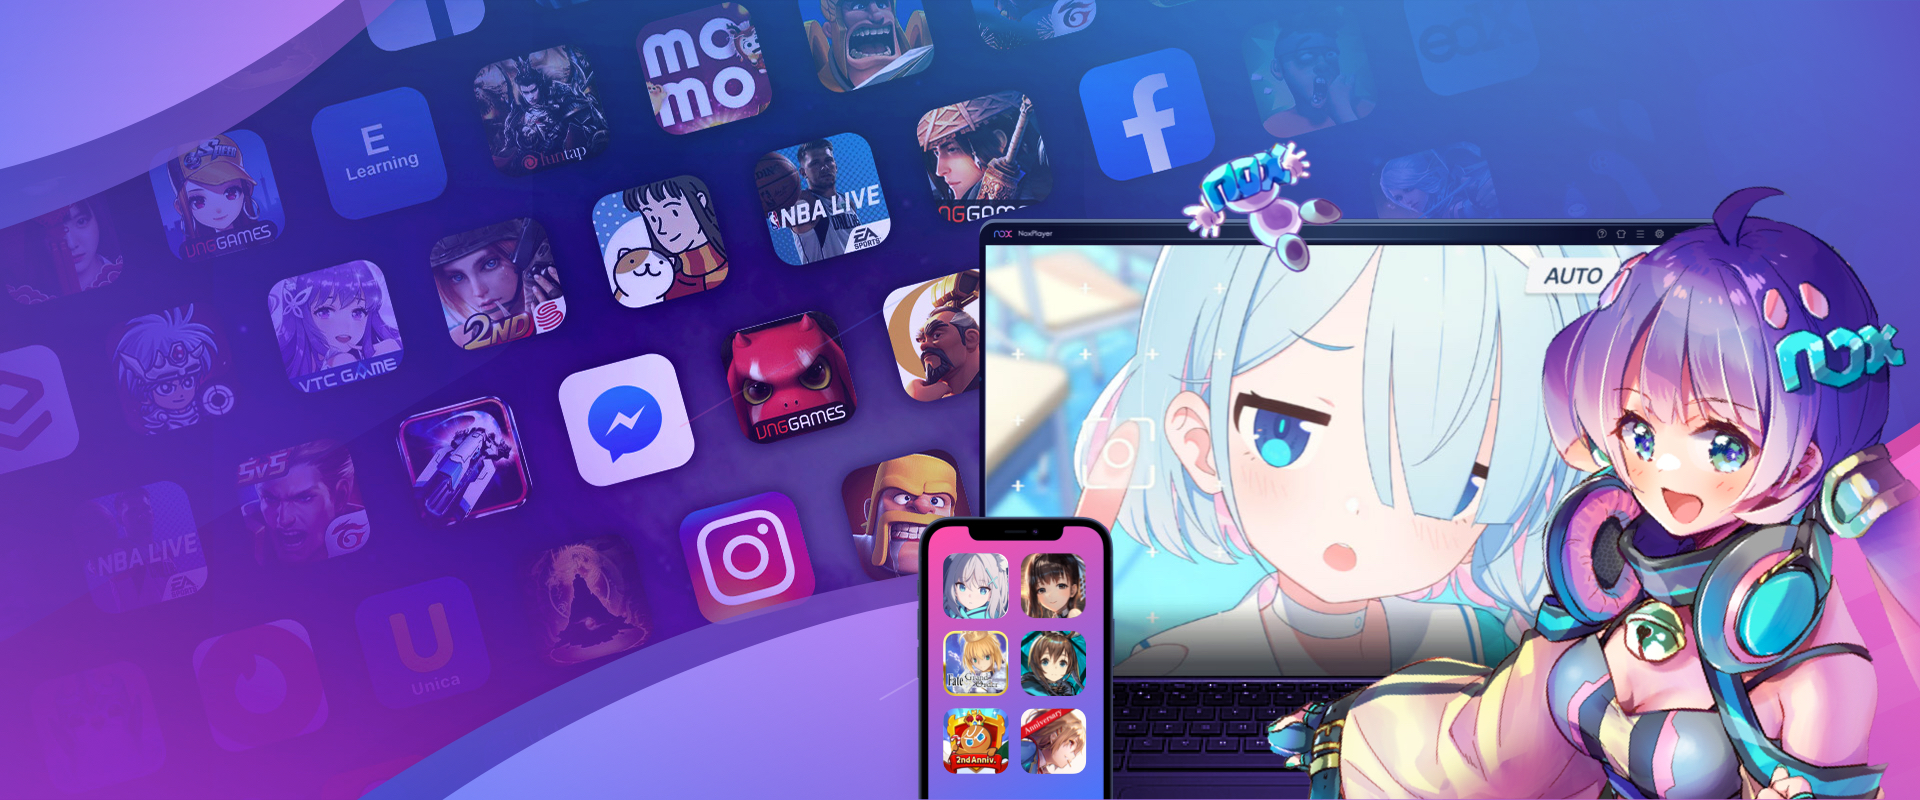 Download & Play Hero Kingdom : Idle RPG on PC & Mac with NoxPlayer (Emulator)